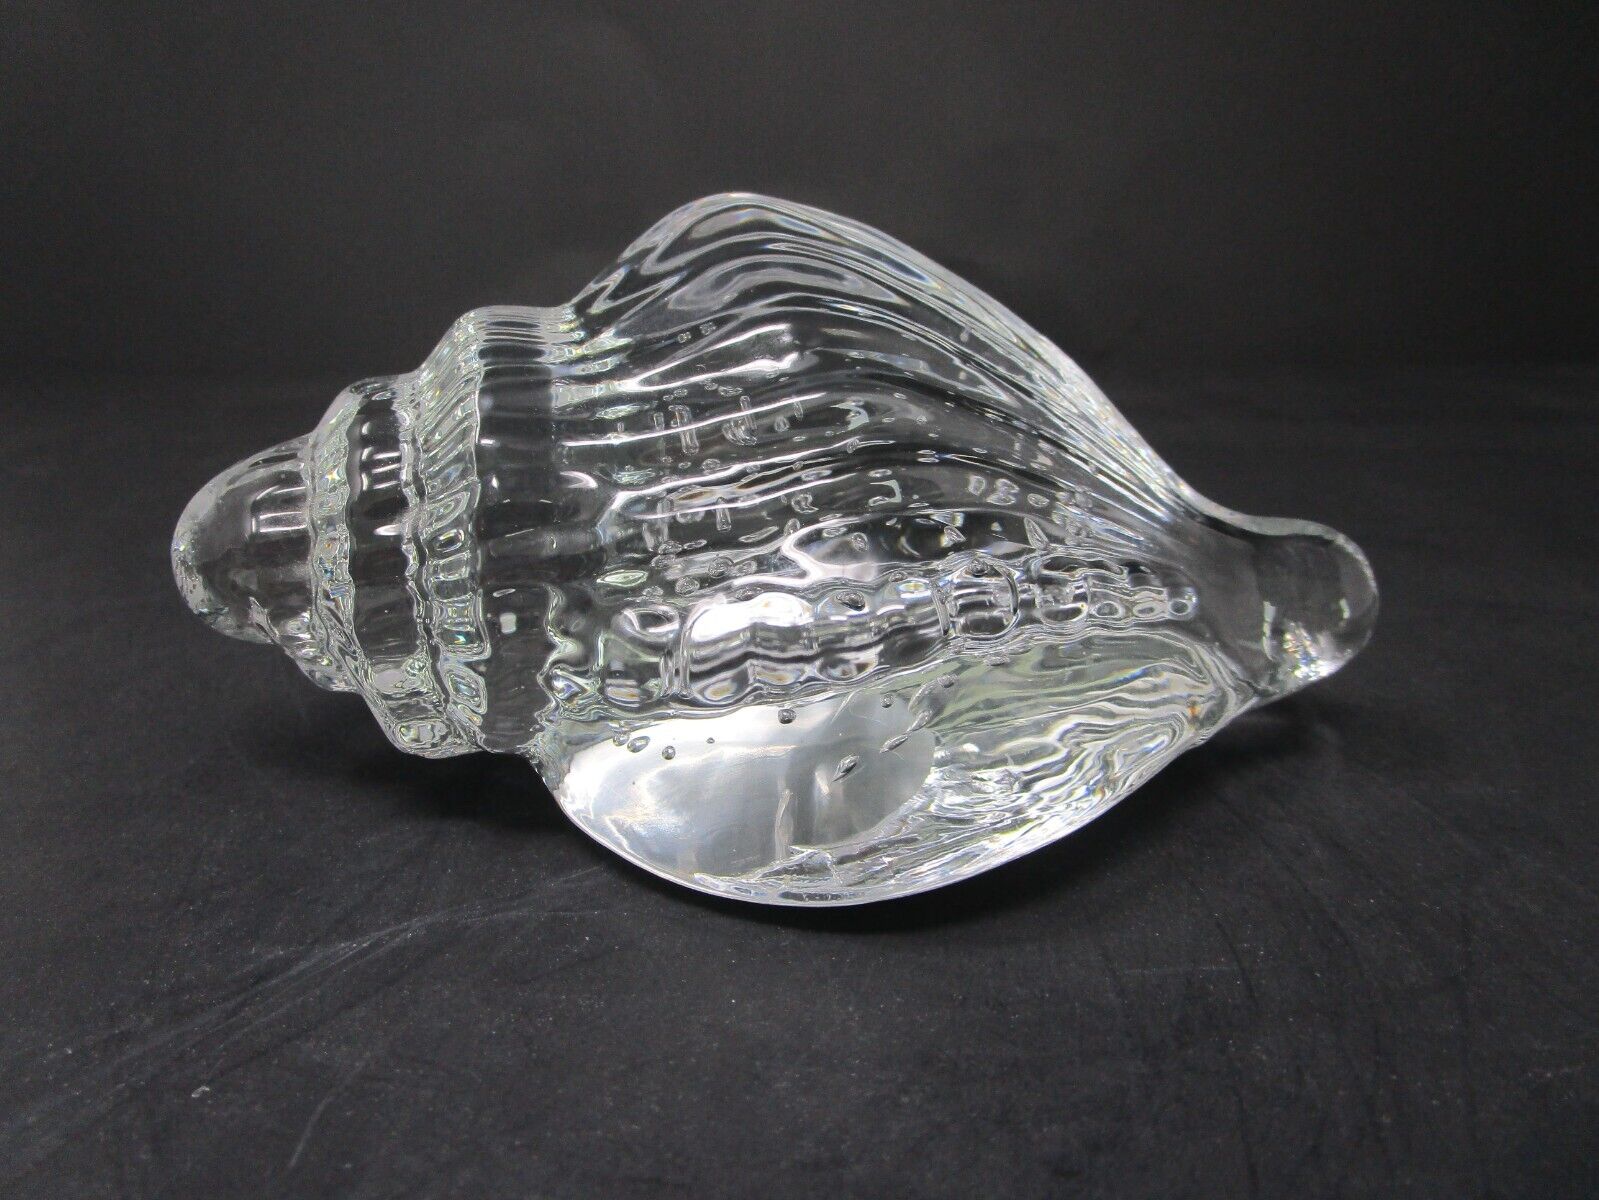 Vintage Clear Art Glass Seashell Paperweight with Controlled Bubbles